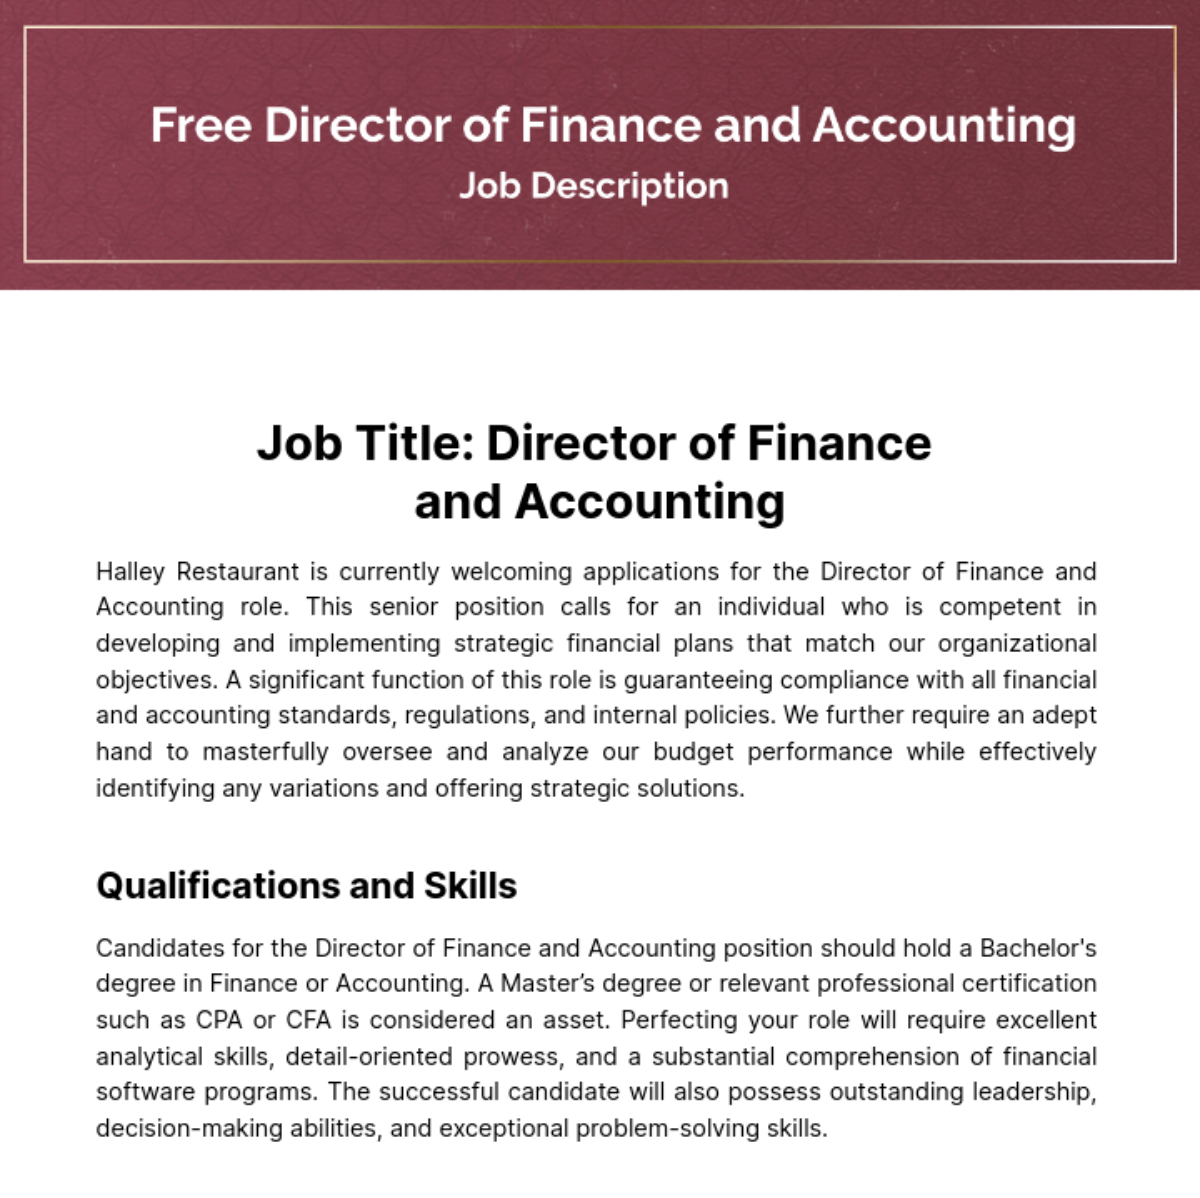 Director of Finance and Accounting Job Description Template